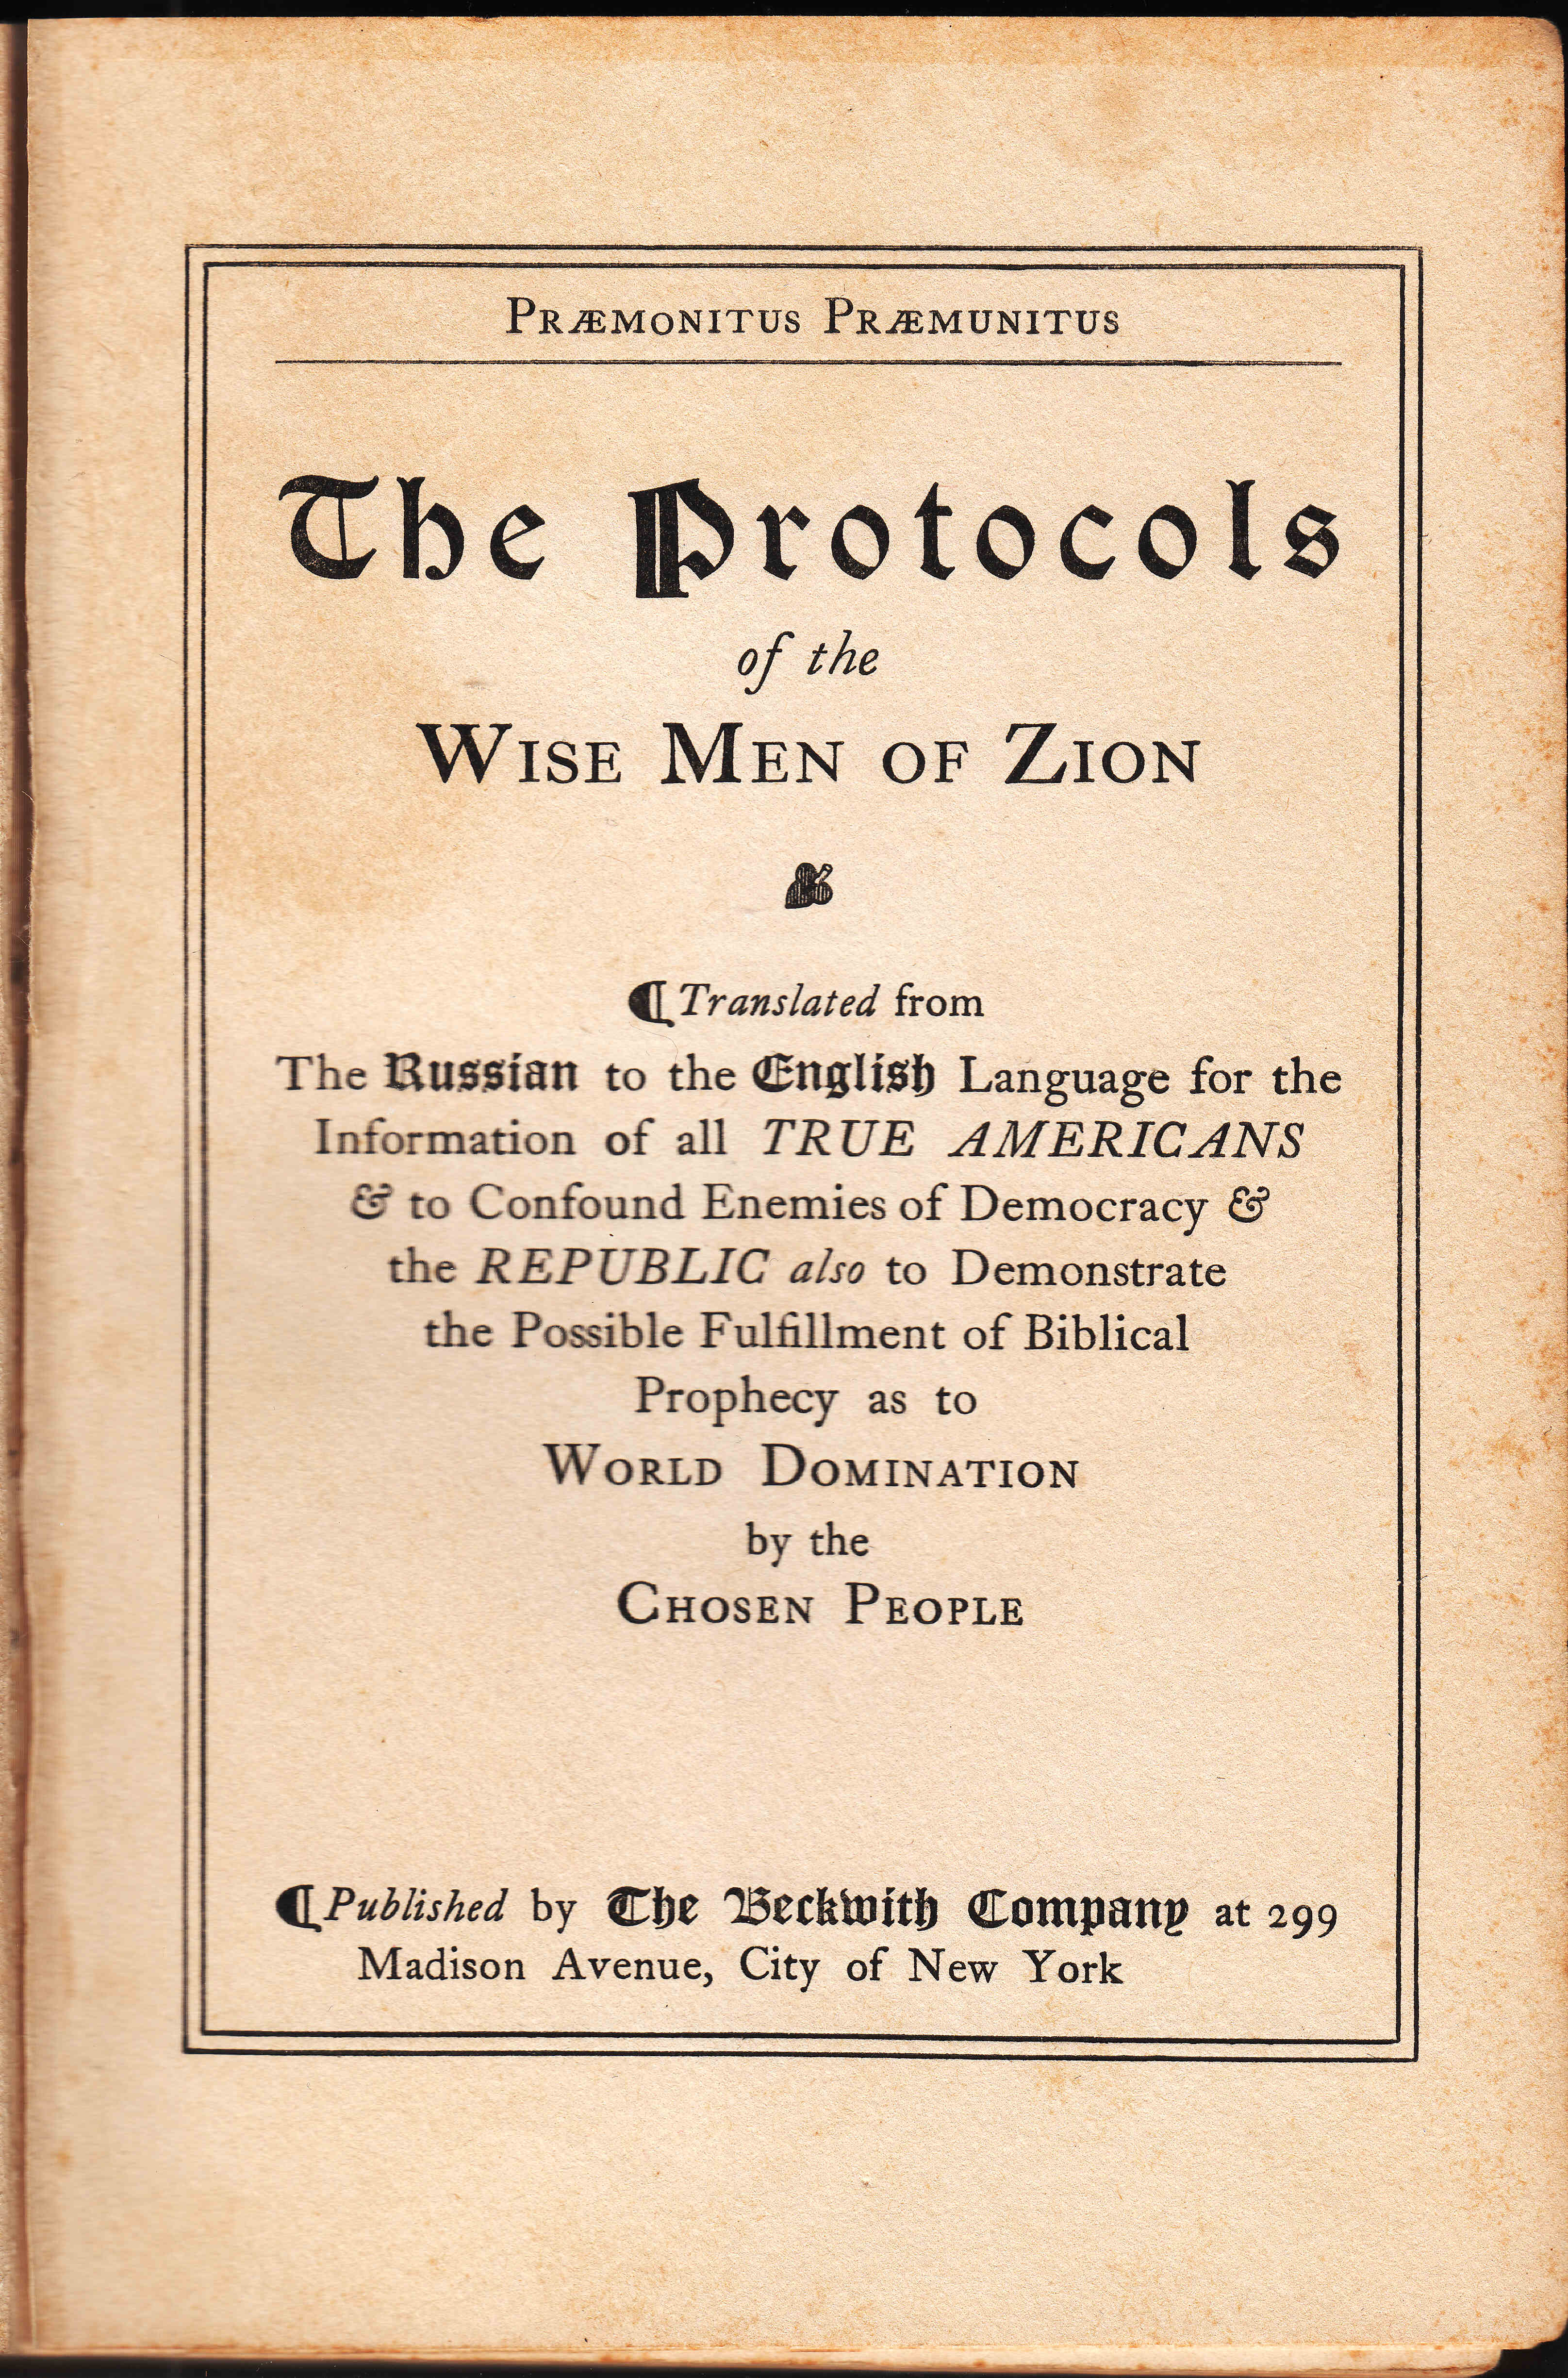 Protocols of the Wise Men of Zion (The Beckwith Company, New York, 1920).